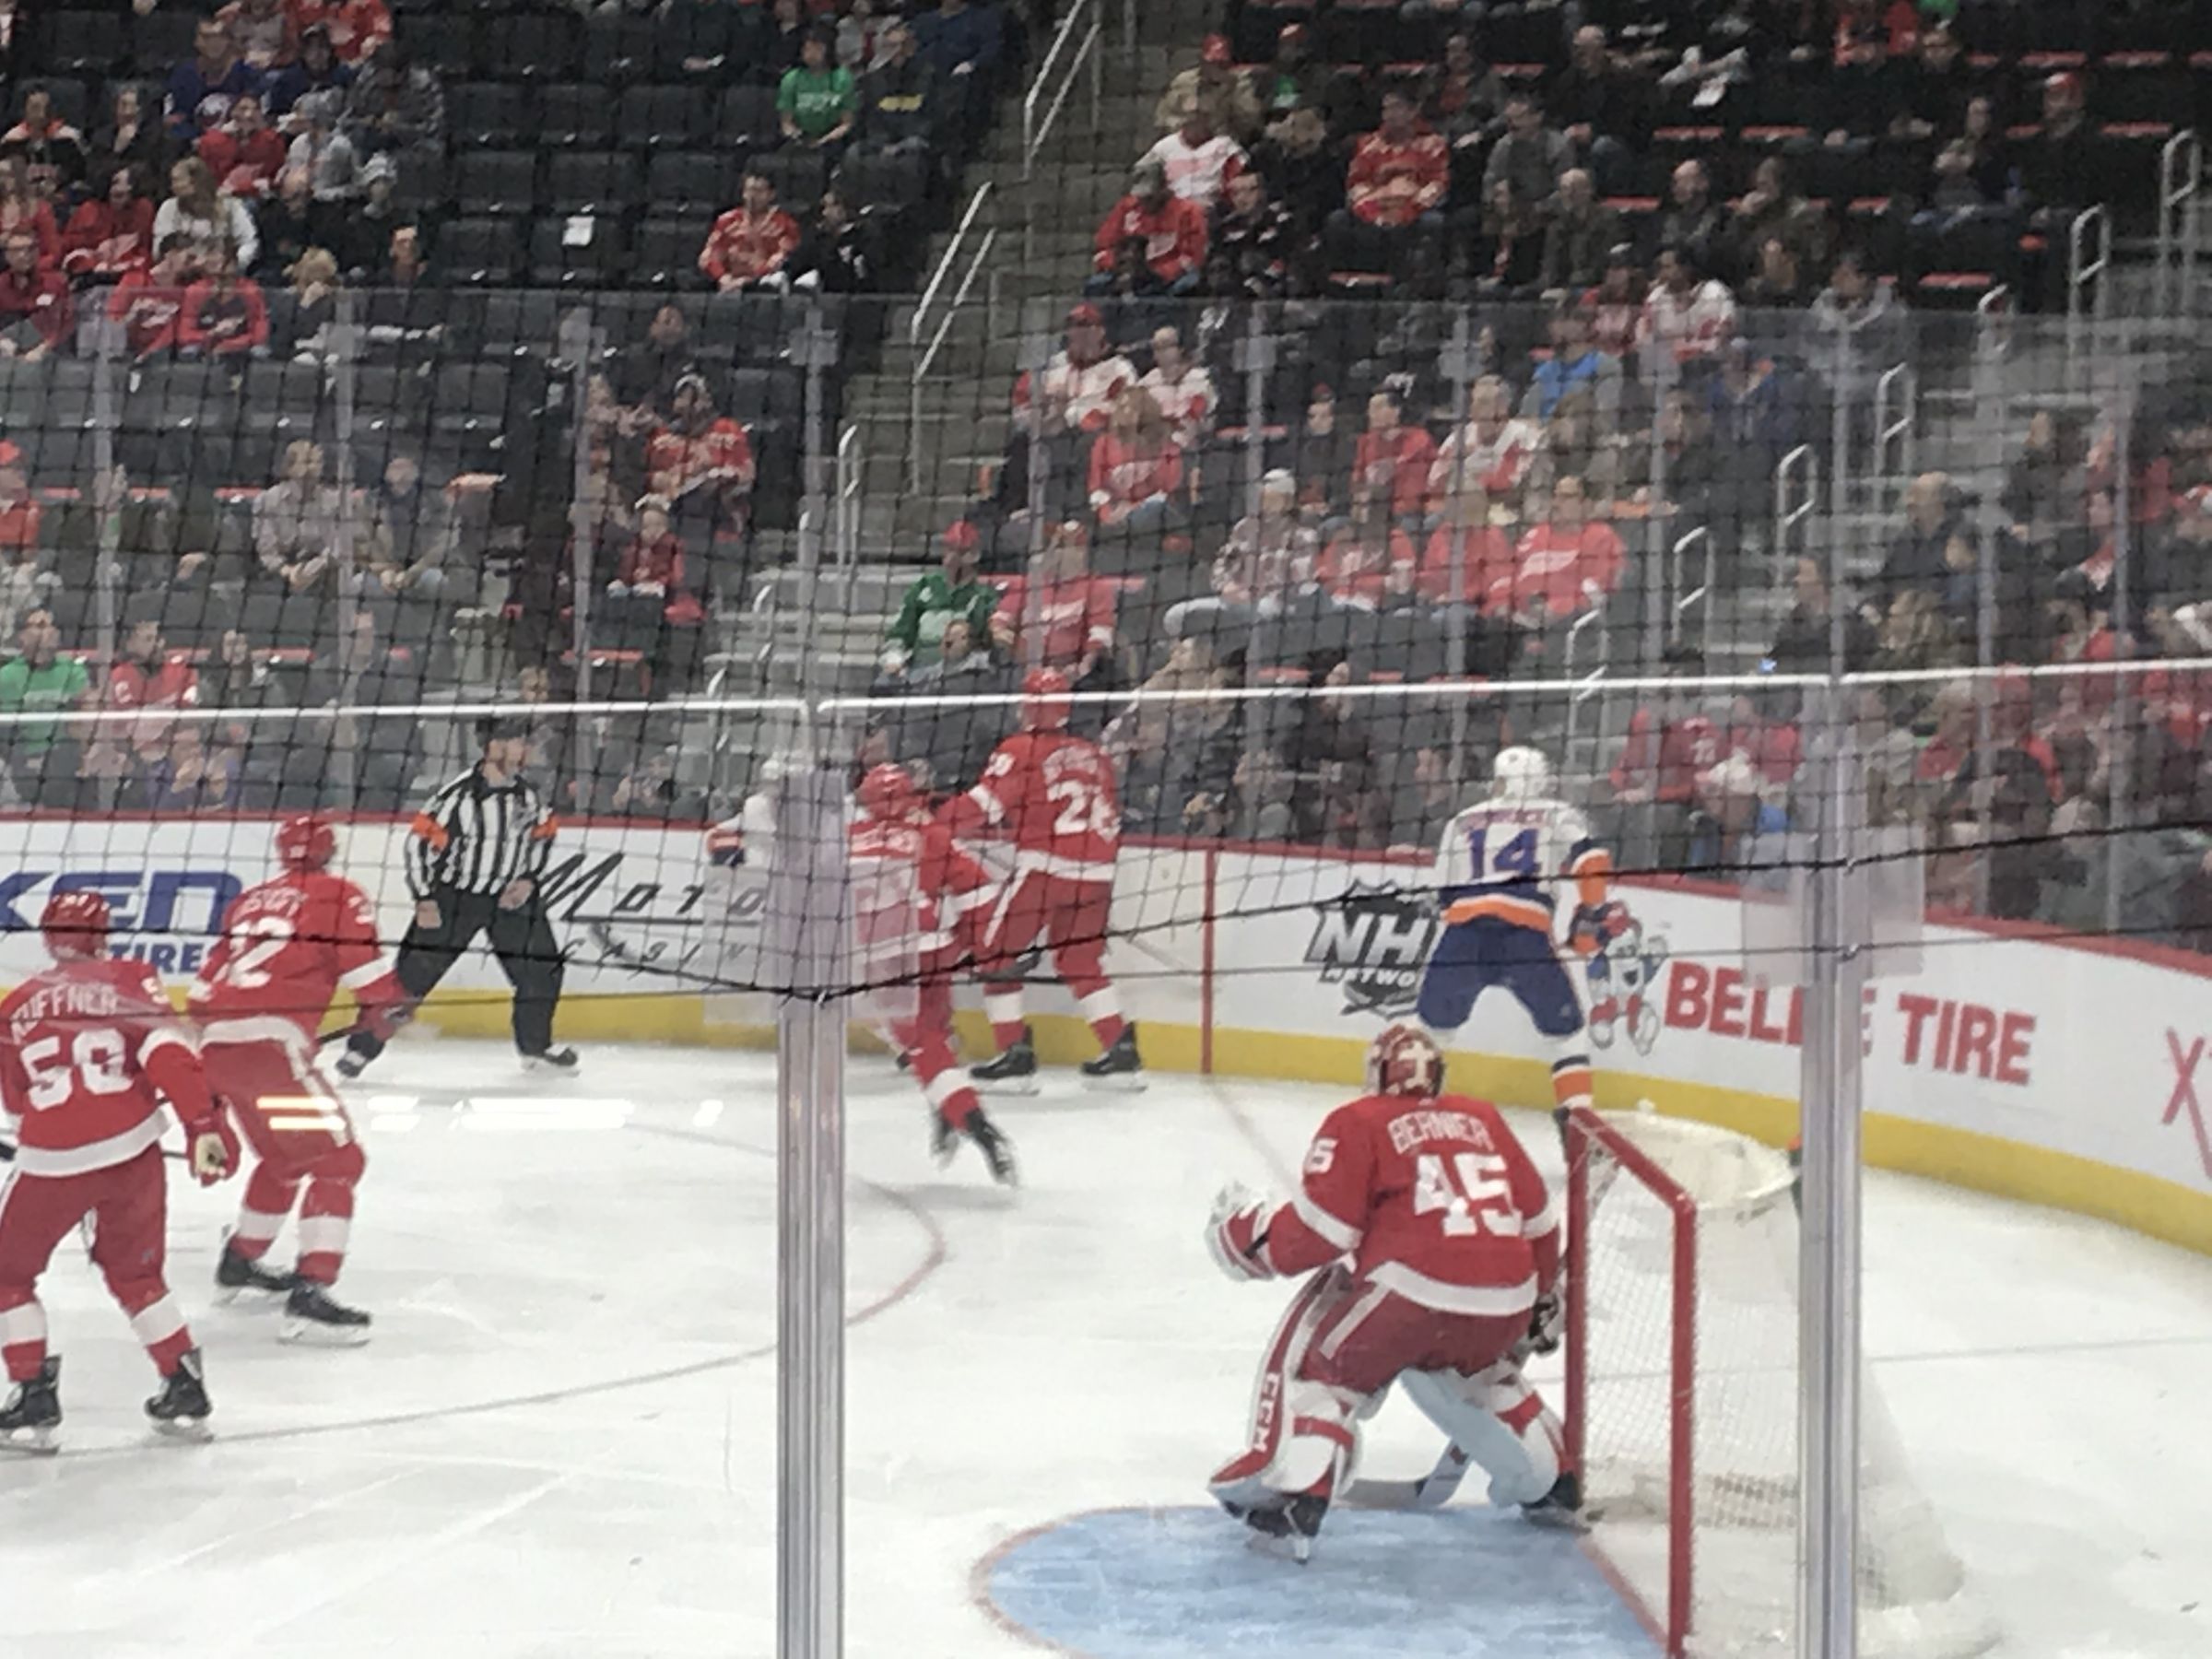 section 106, row 8 seat view  for hockey - little caesars arena